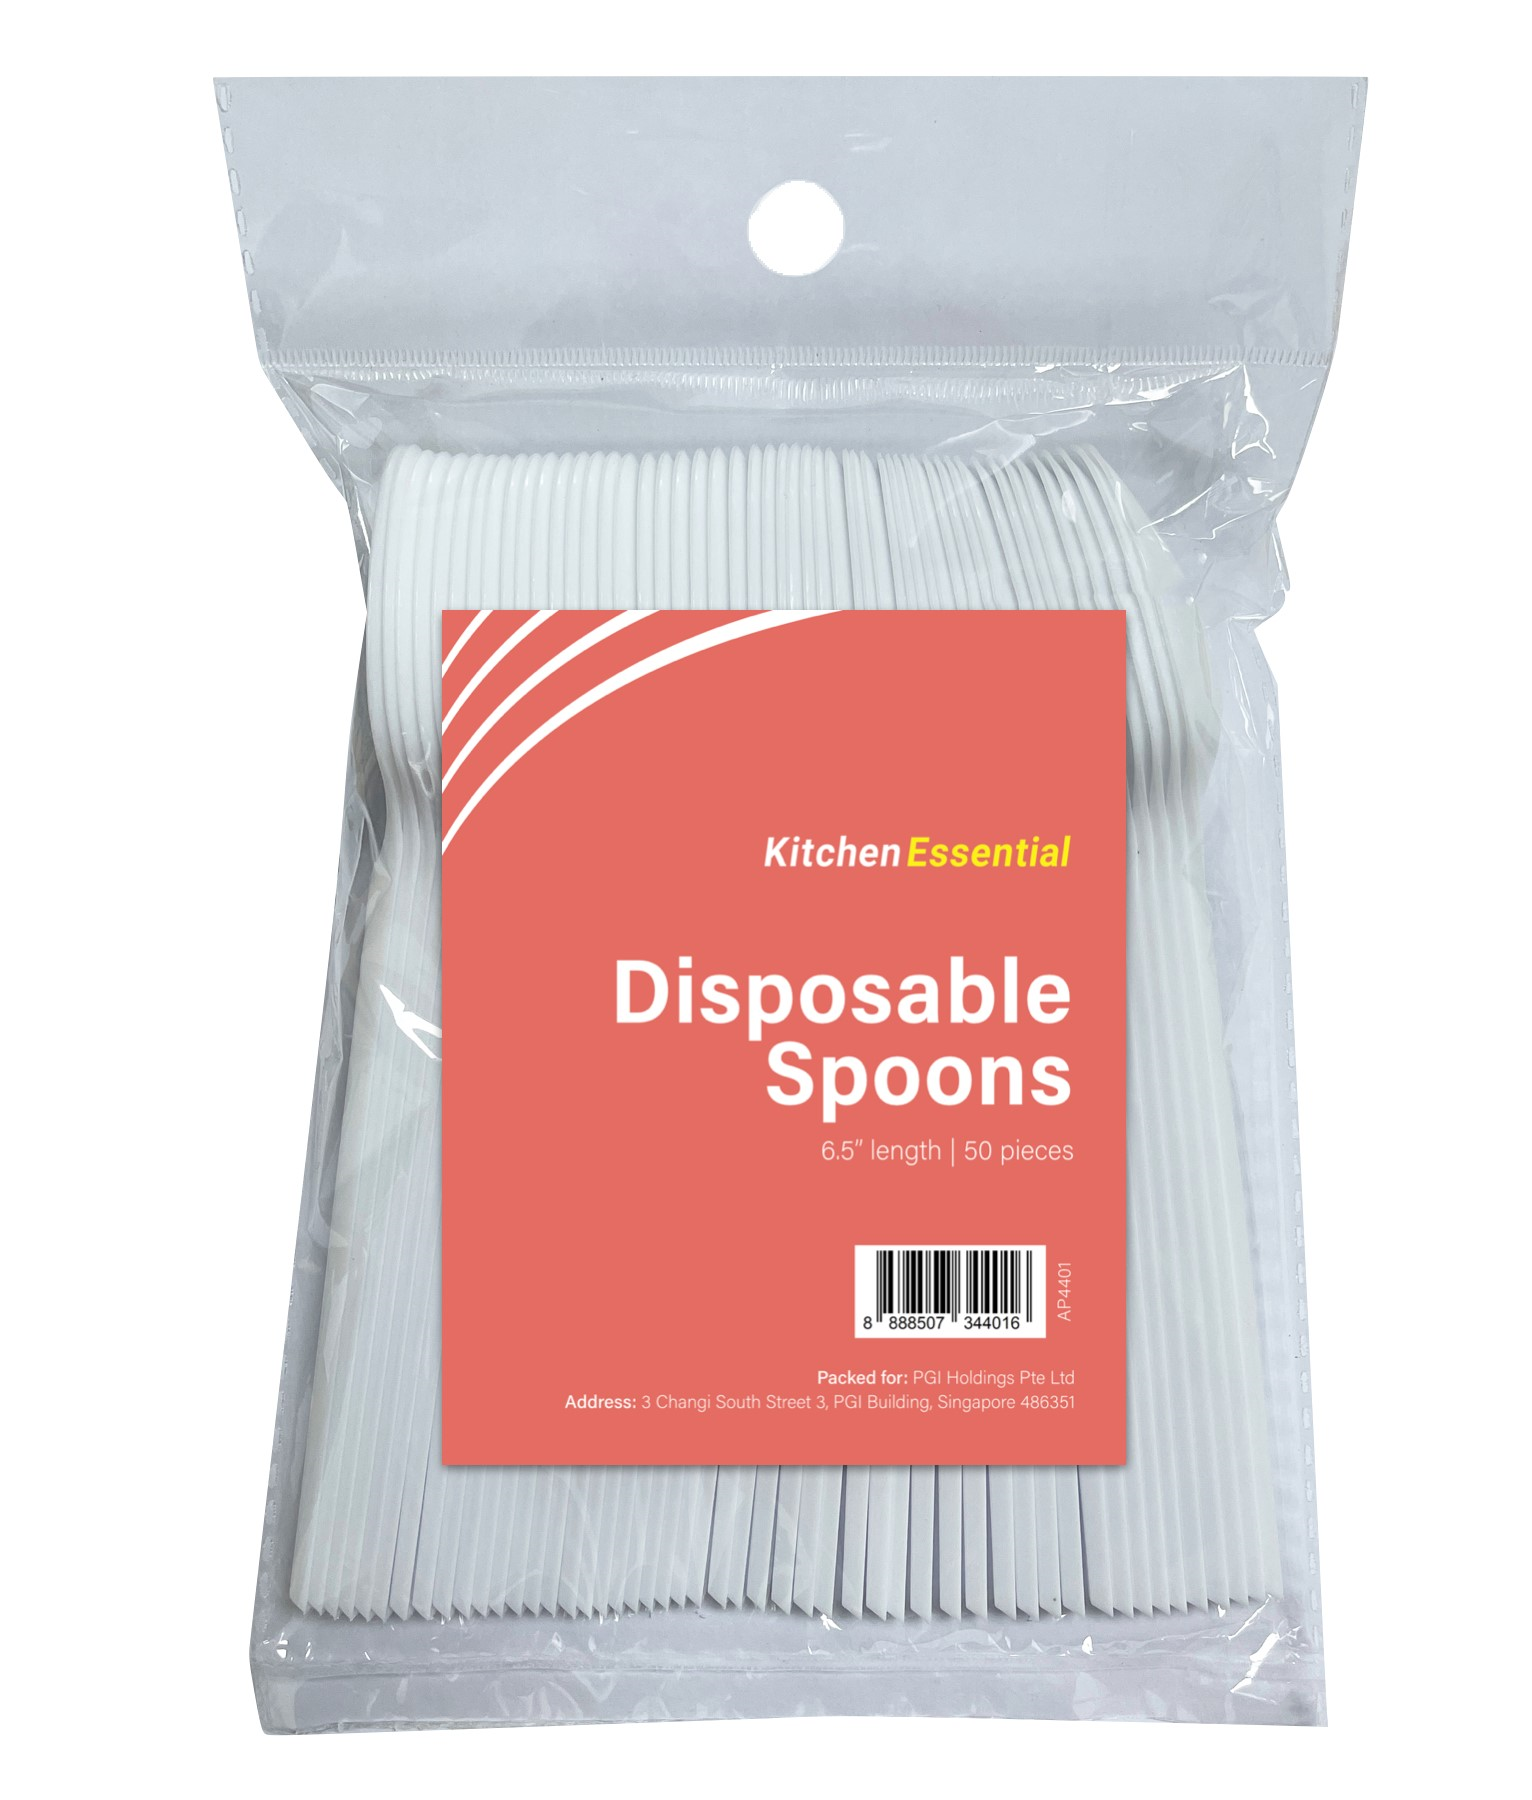 KITCHEN ESSENTIAL Disposable Spoons 50PC/PACK 6.5" LENGTH